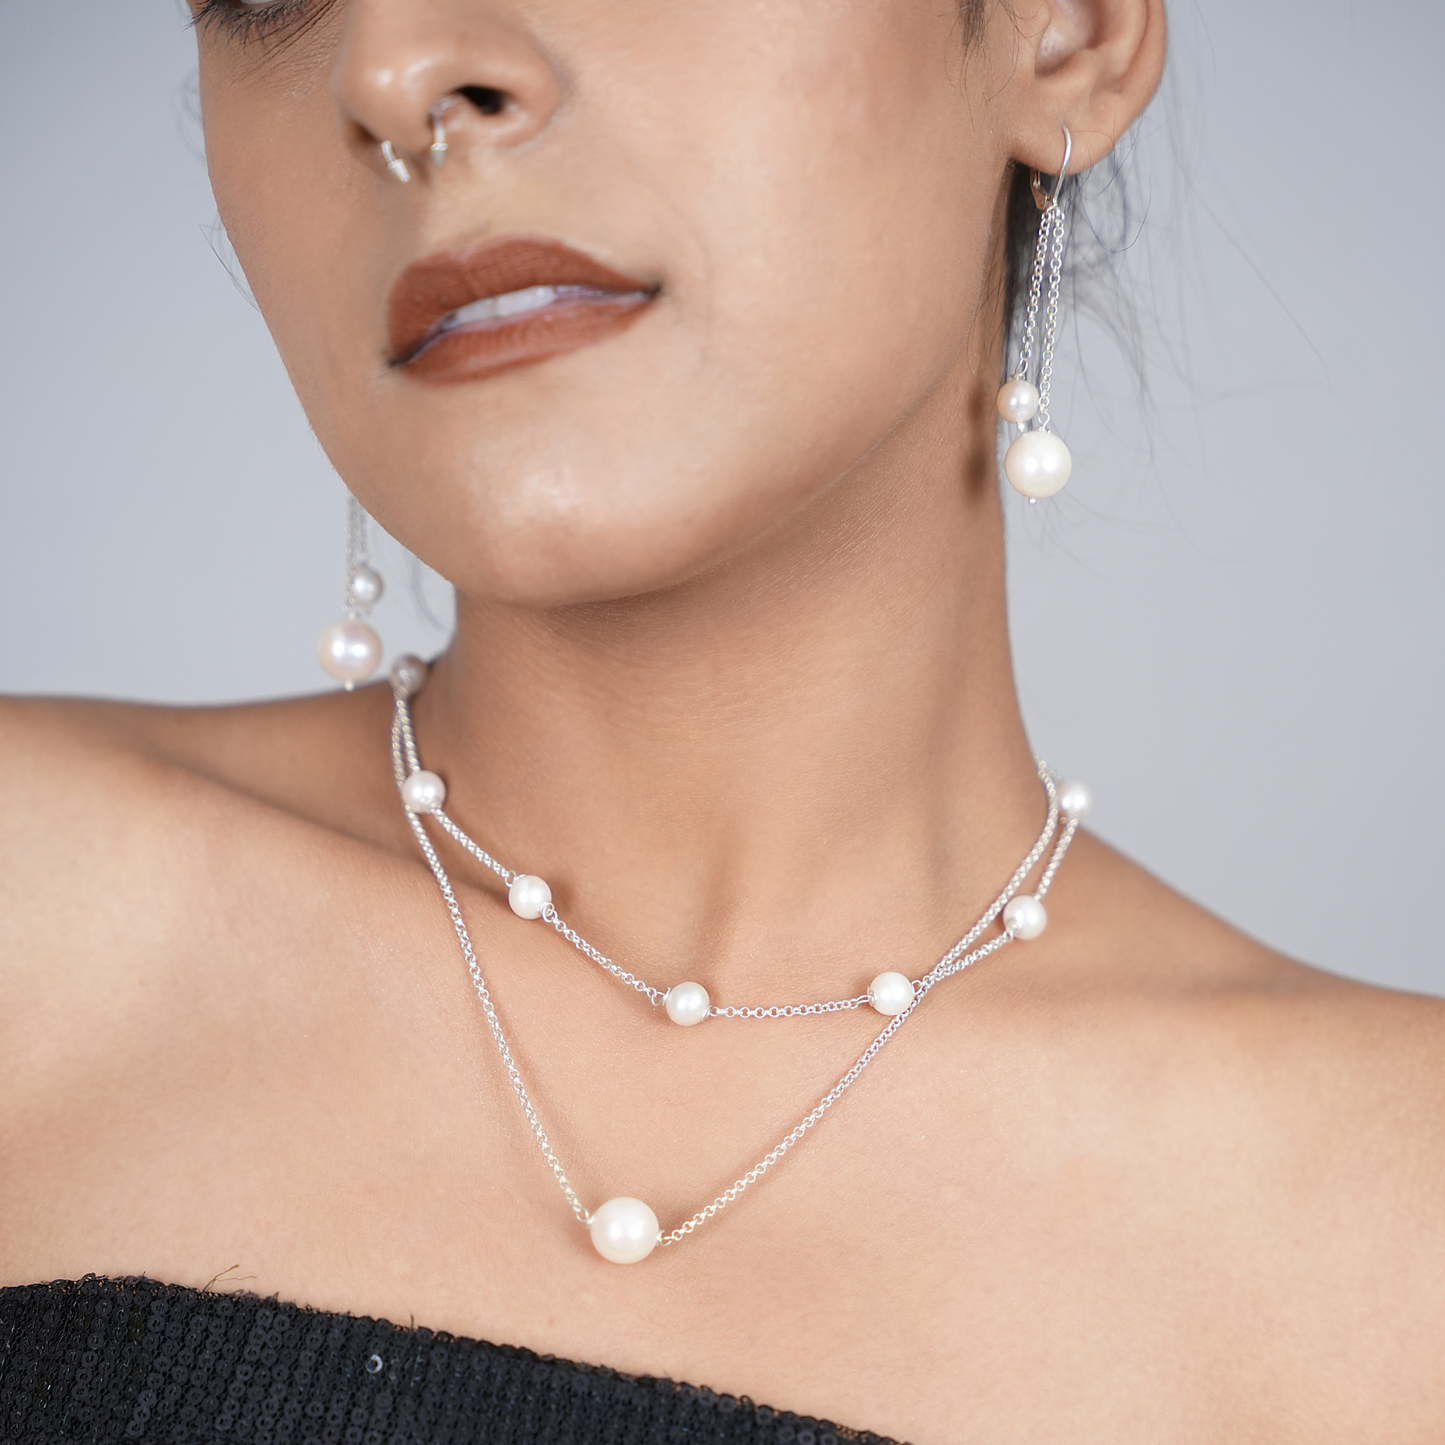 8mm Cultured Pearl Station Silver Chain Necklace and Earrings